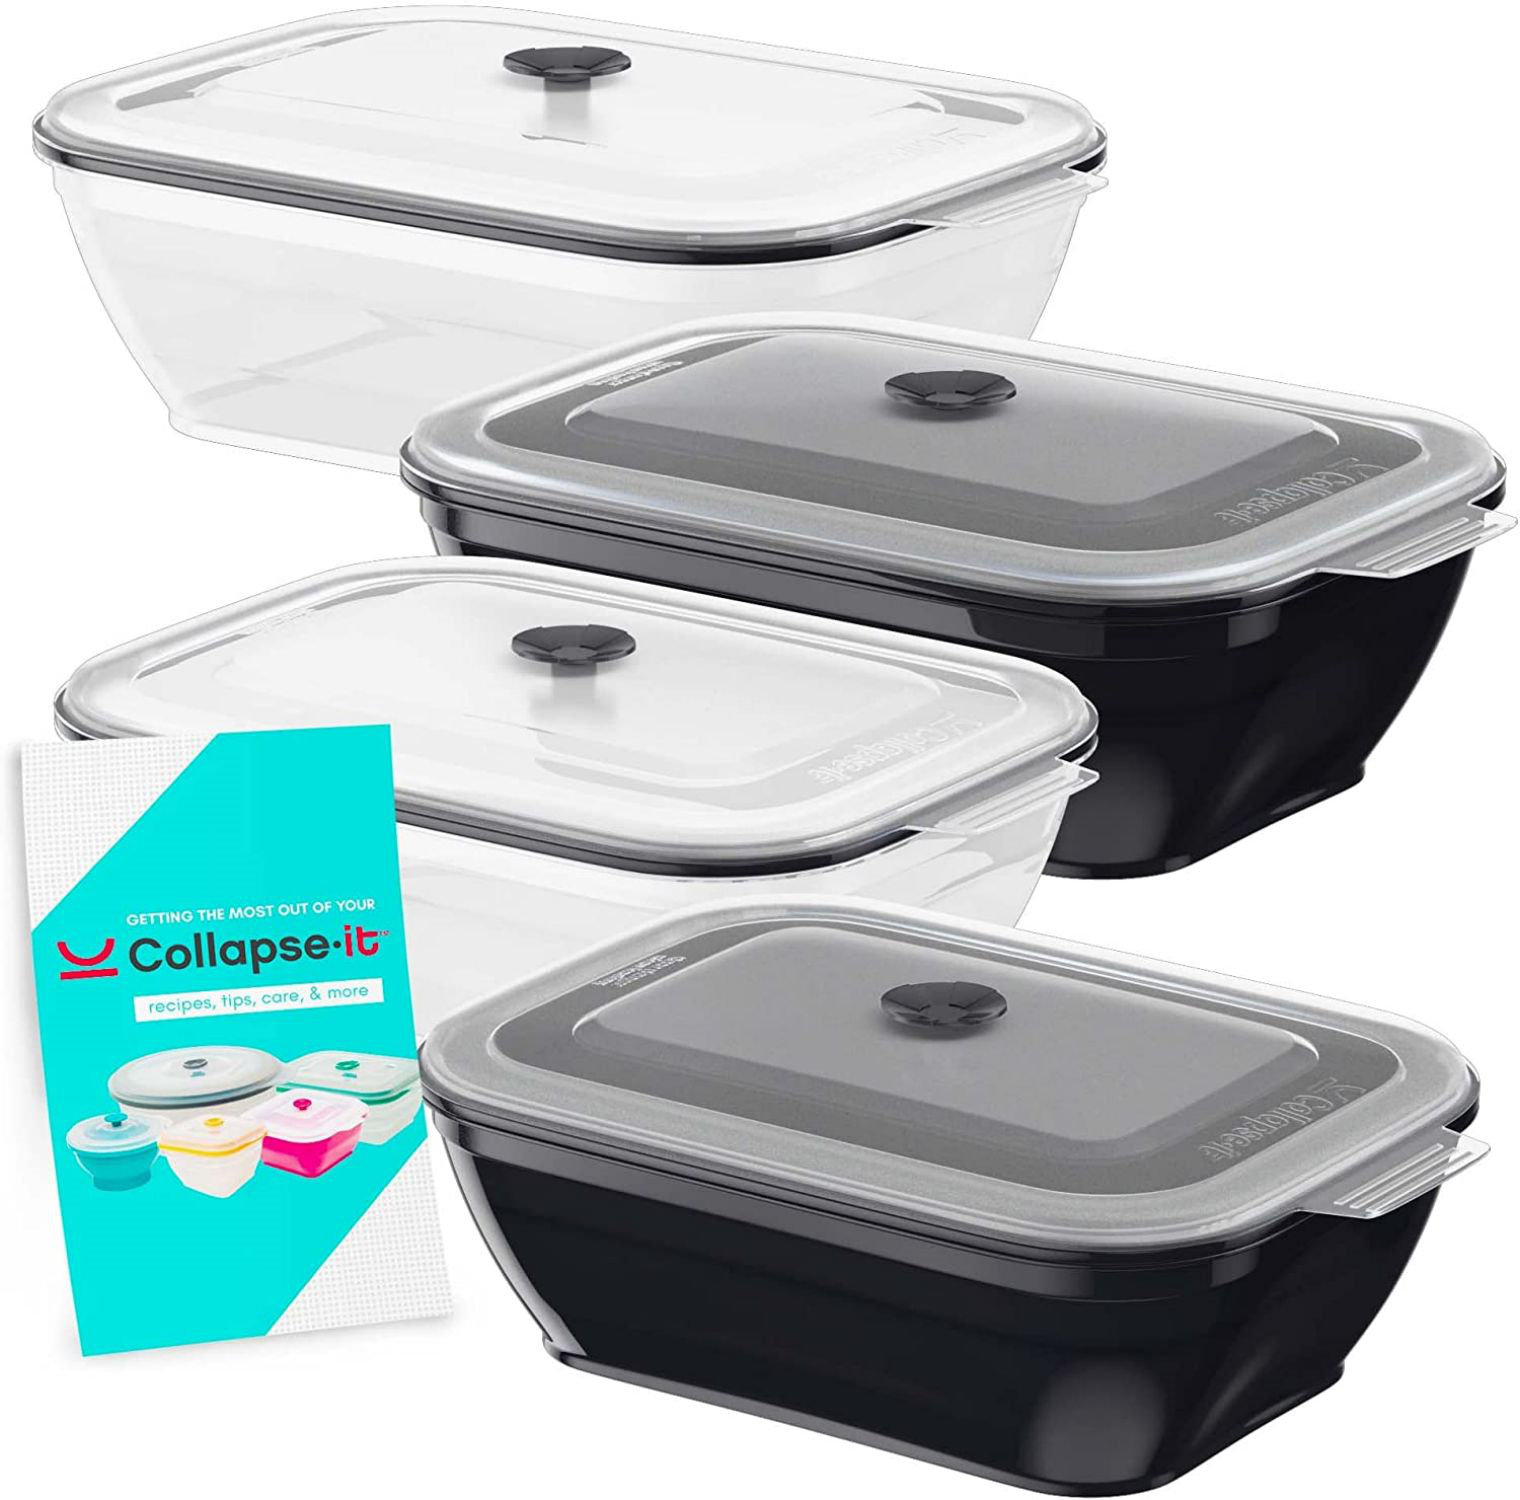 Collapse-it Silicone Food Storage Containers - BPA Free Airtight Silicone  Lids Collapsible Lunch Box Containers - Oven, Microwave, & Freezer Safe